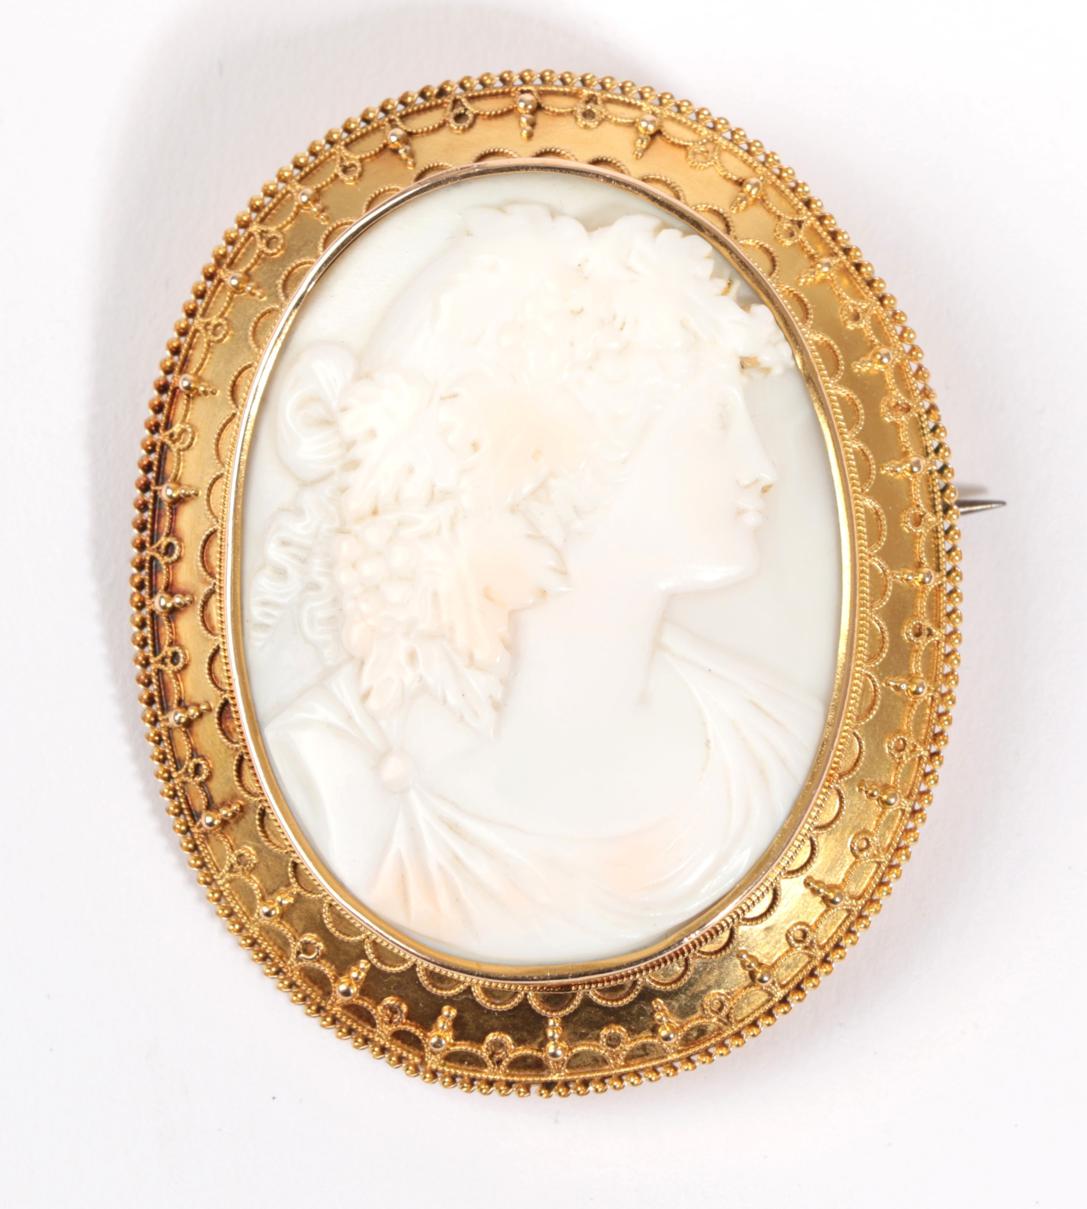 A Cameo Brooch, depicting Bacchus, within an oval bead and decorated rope work frame, circa 1880,